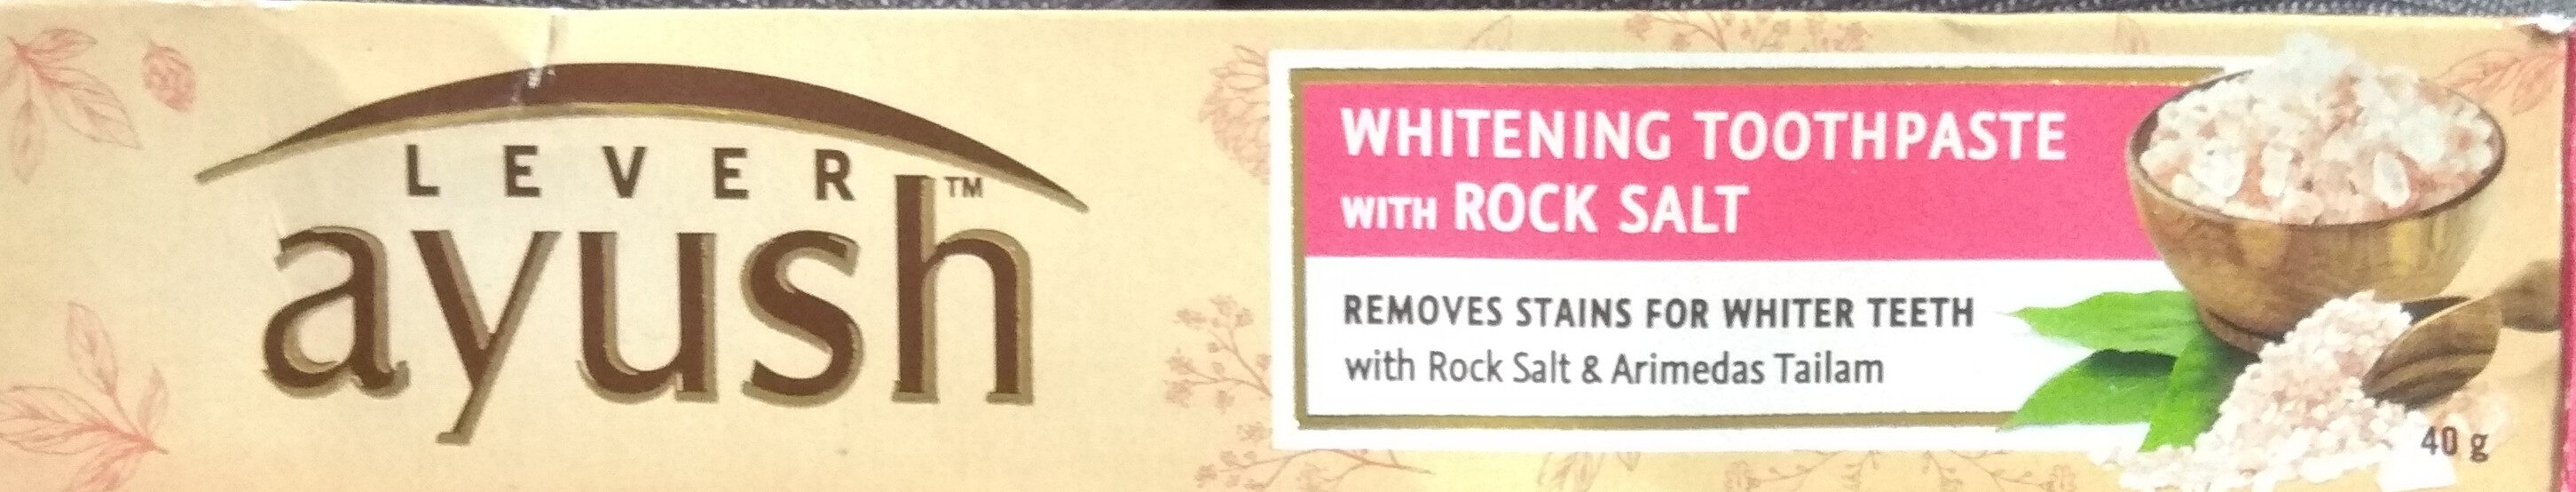 Whitening Toothpaste with rock salt - Product - en